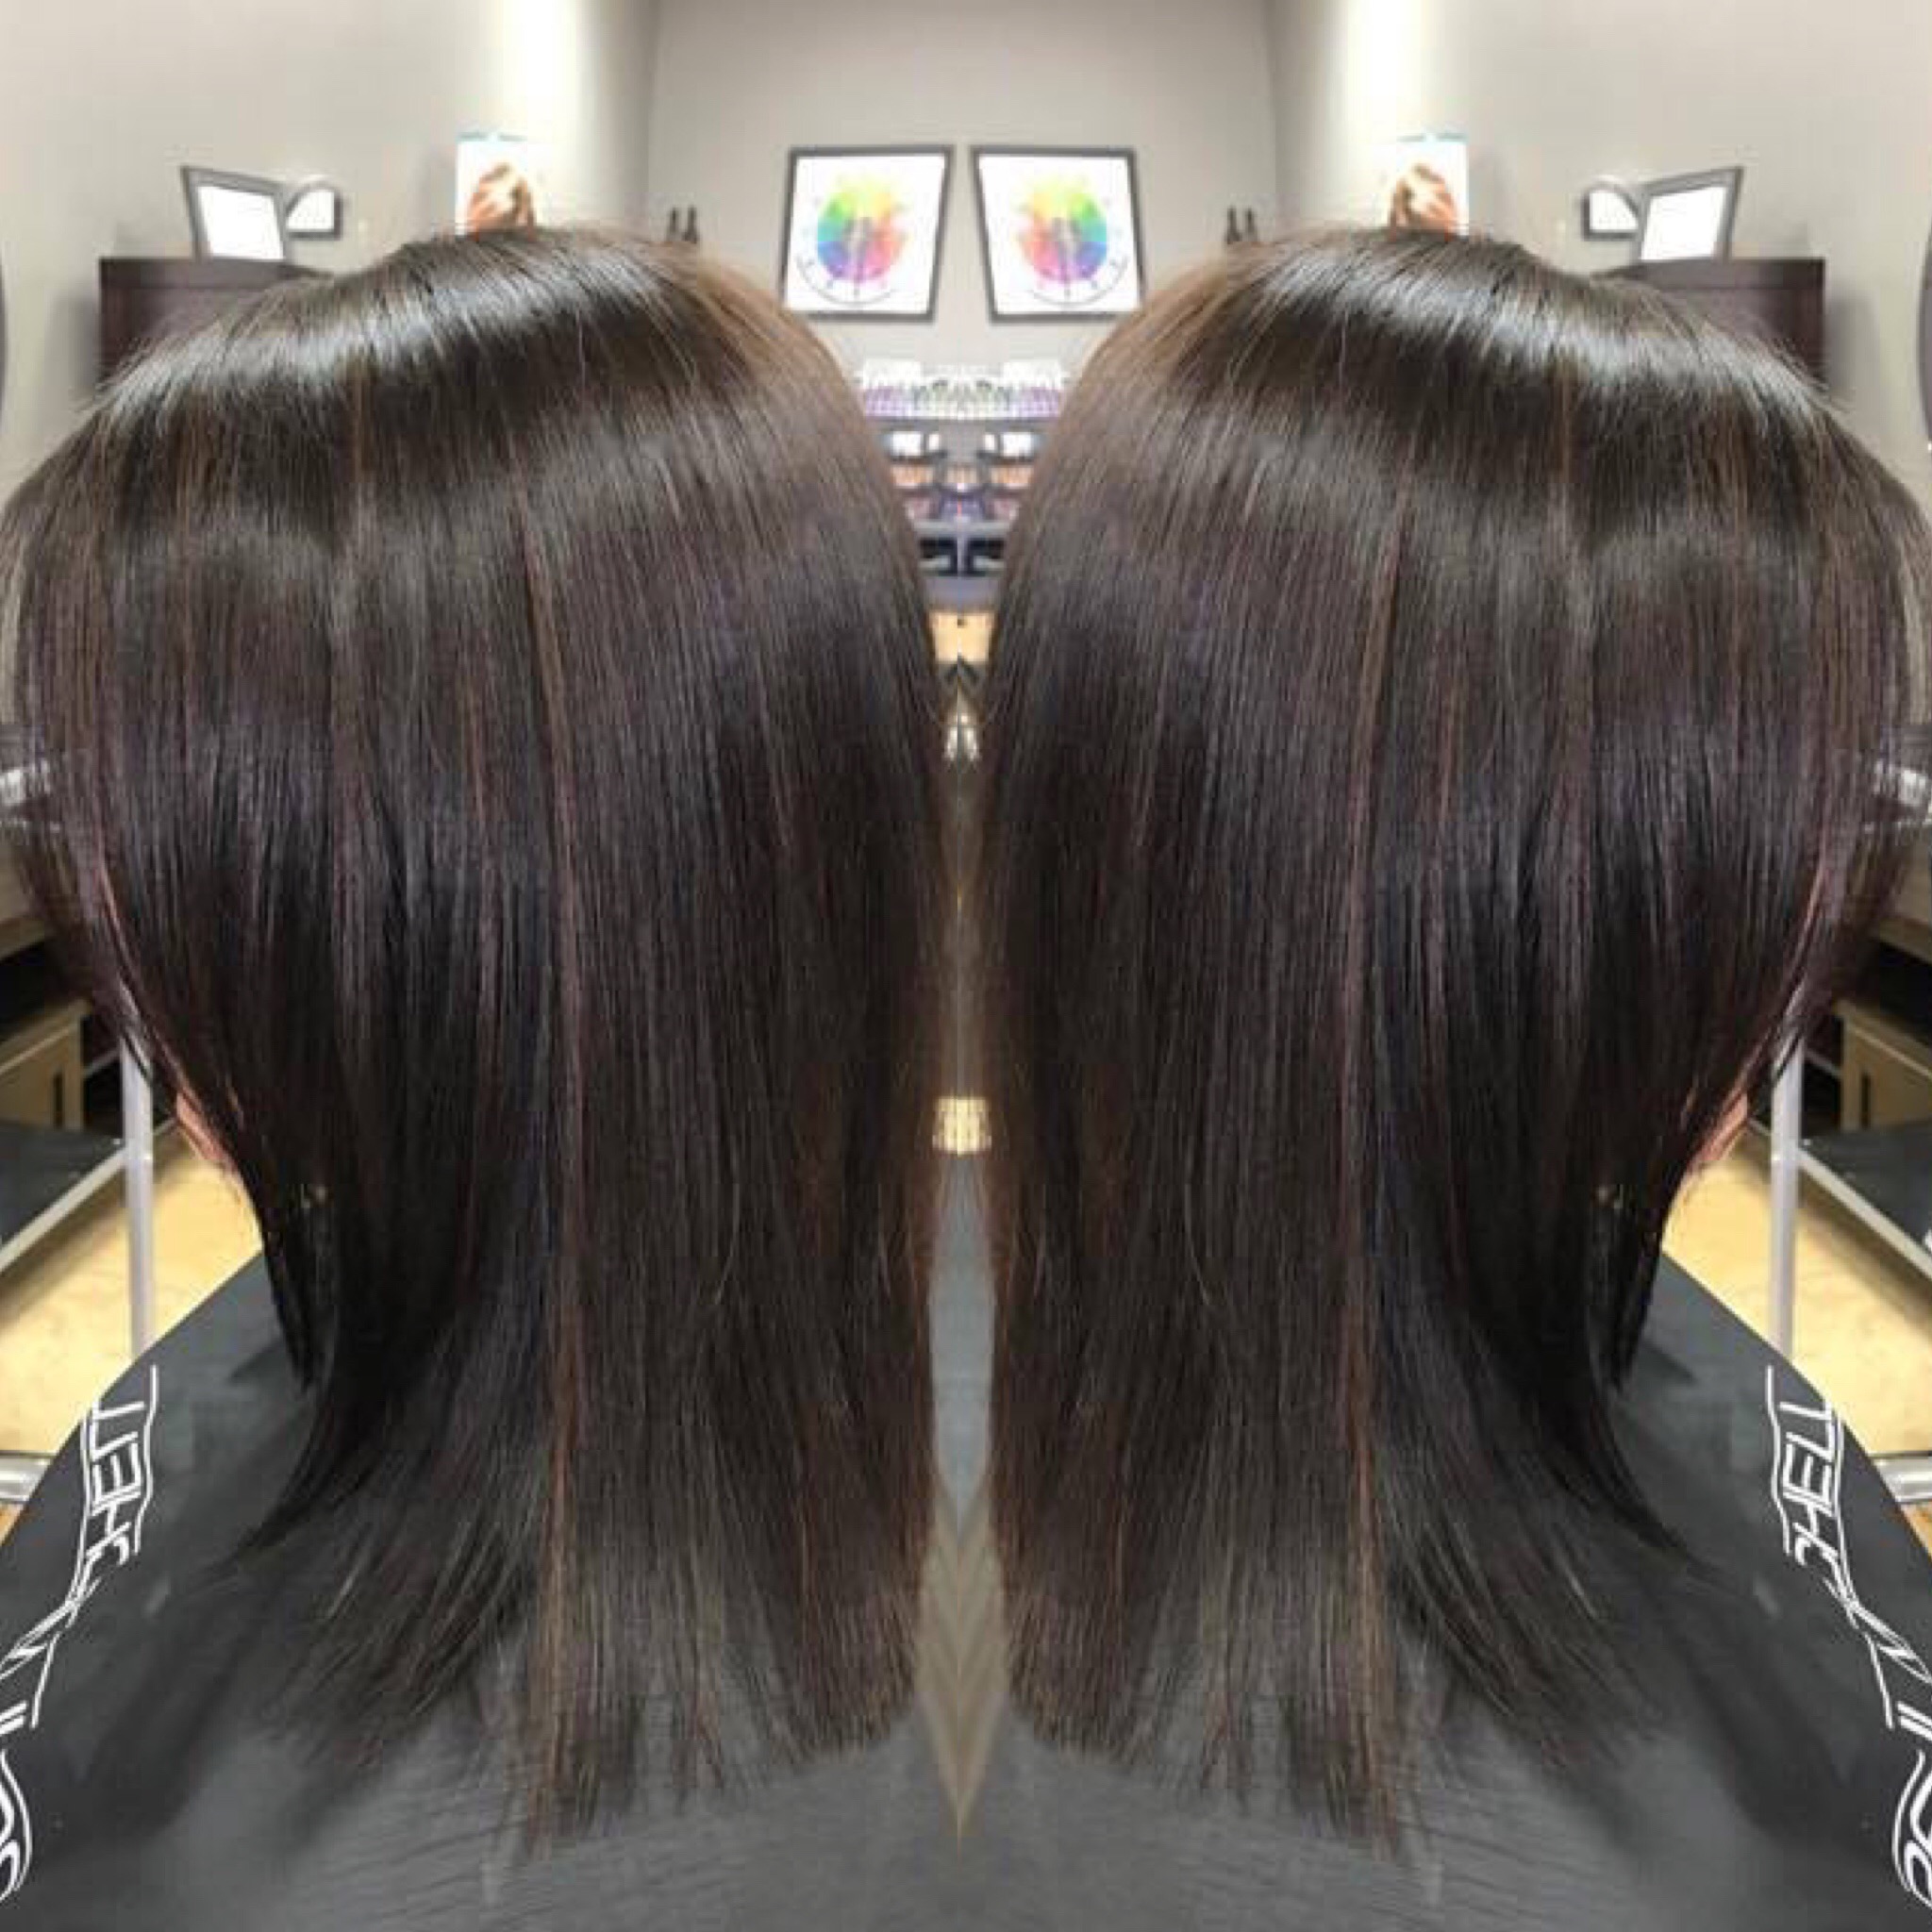 A cool toned dark brunette haircut and color done by Megan